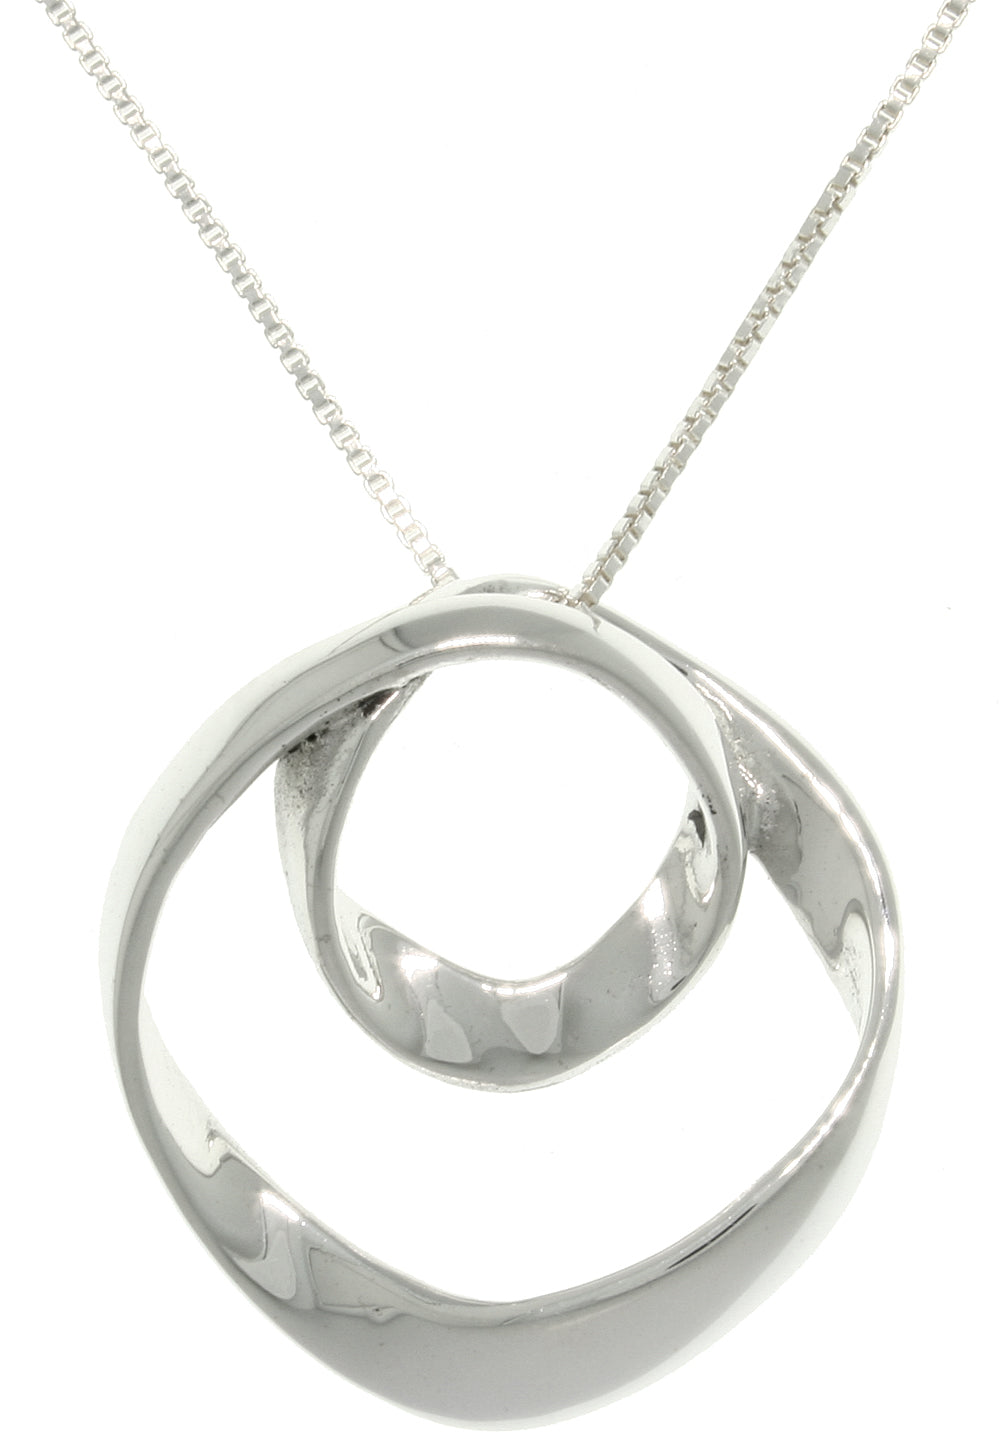 Jewelry Trends Sterling Silver Free Form Circles Pendant with 18 Inch Box Chain Necklace